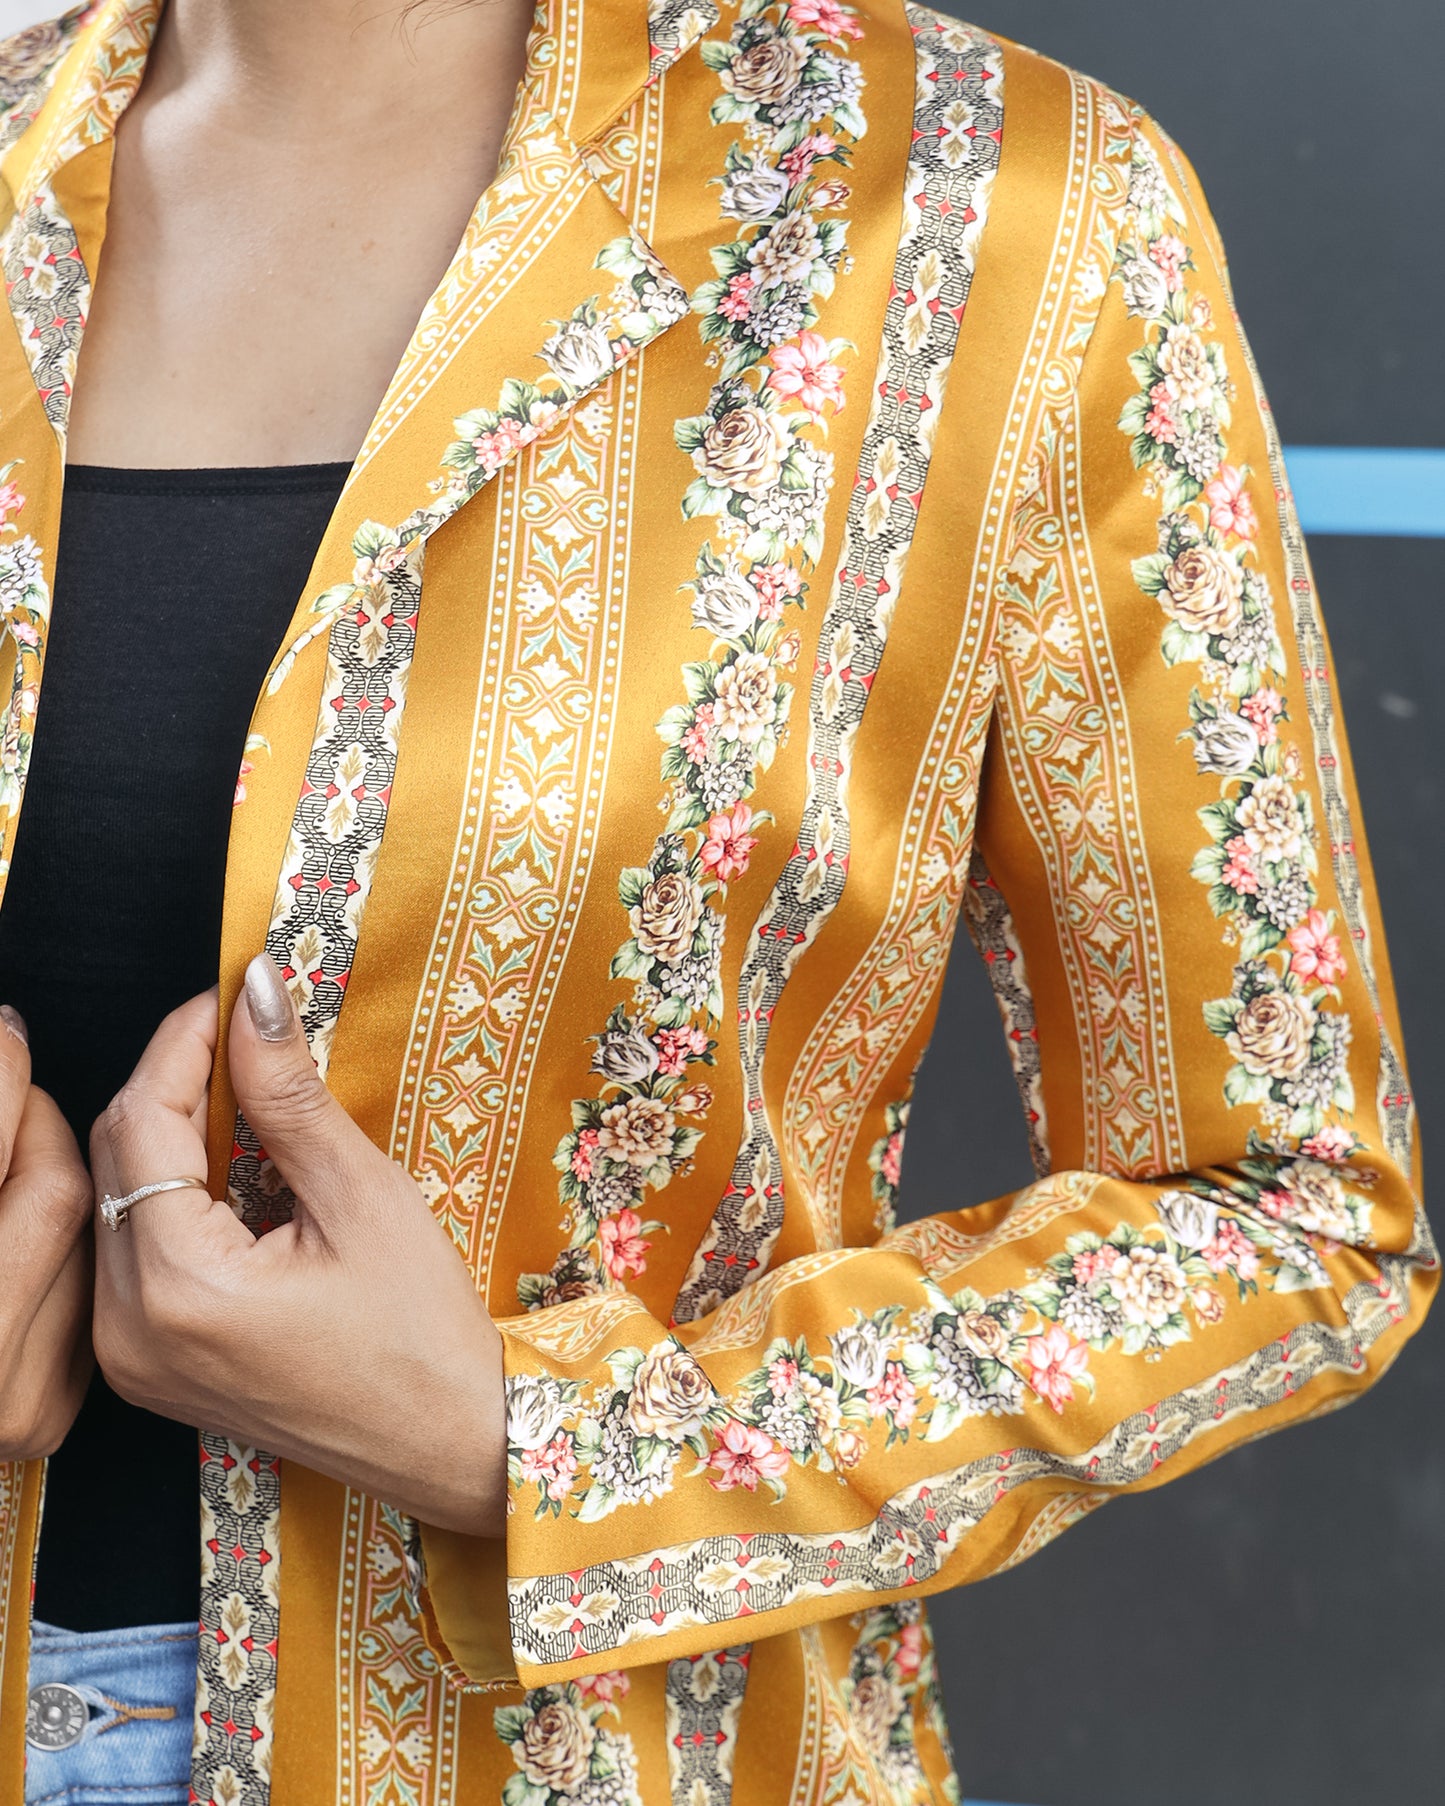 The Easy To Wear Floral Women's Jacket